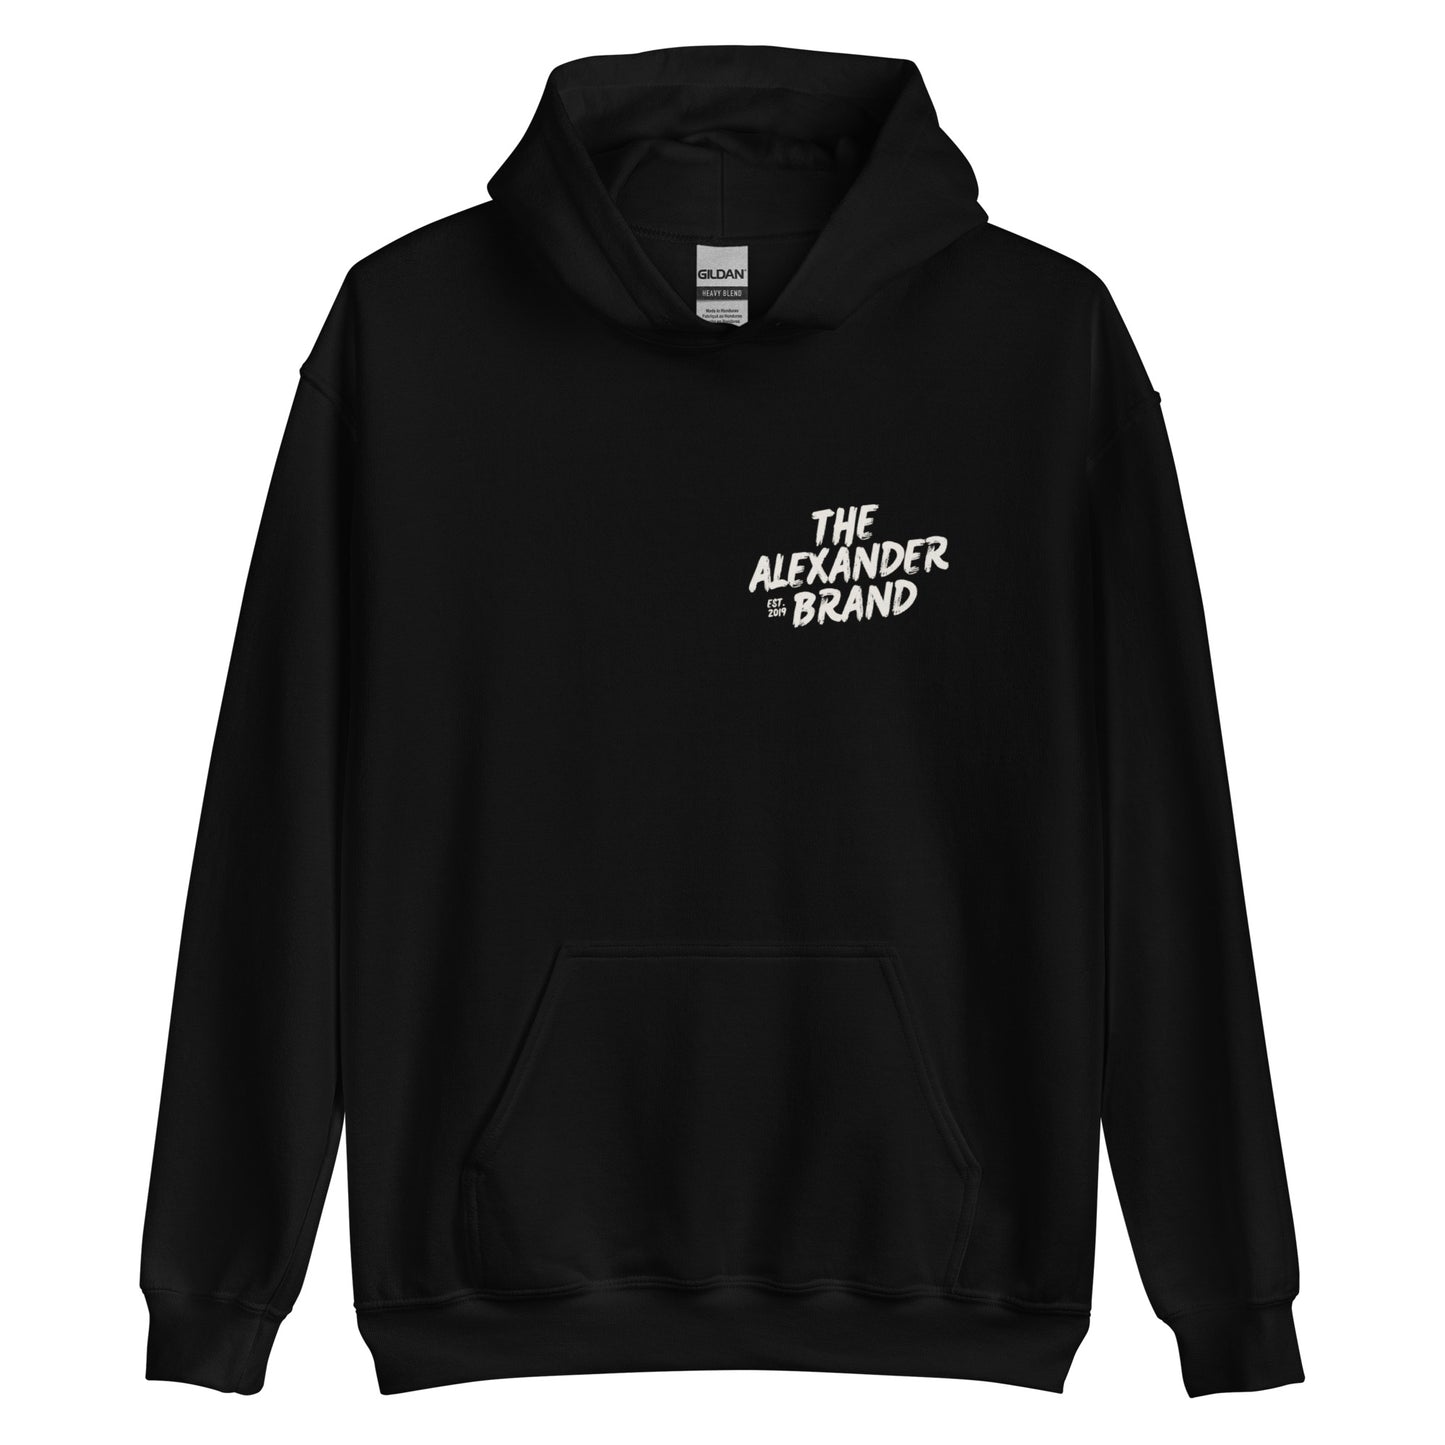 Dear Person Behind me, the world is a better place with you in it -Unisex Hoodie